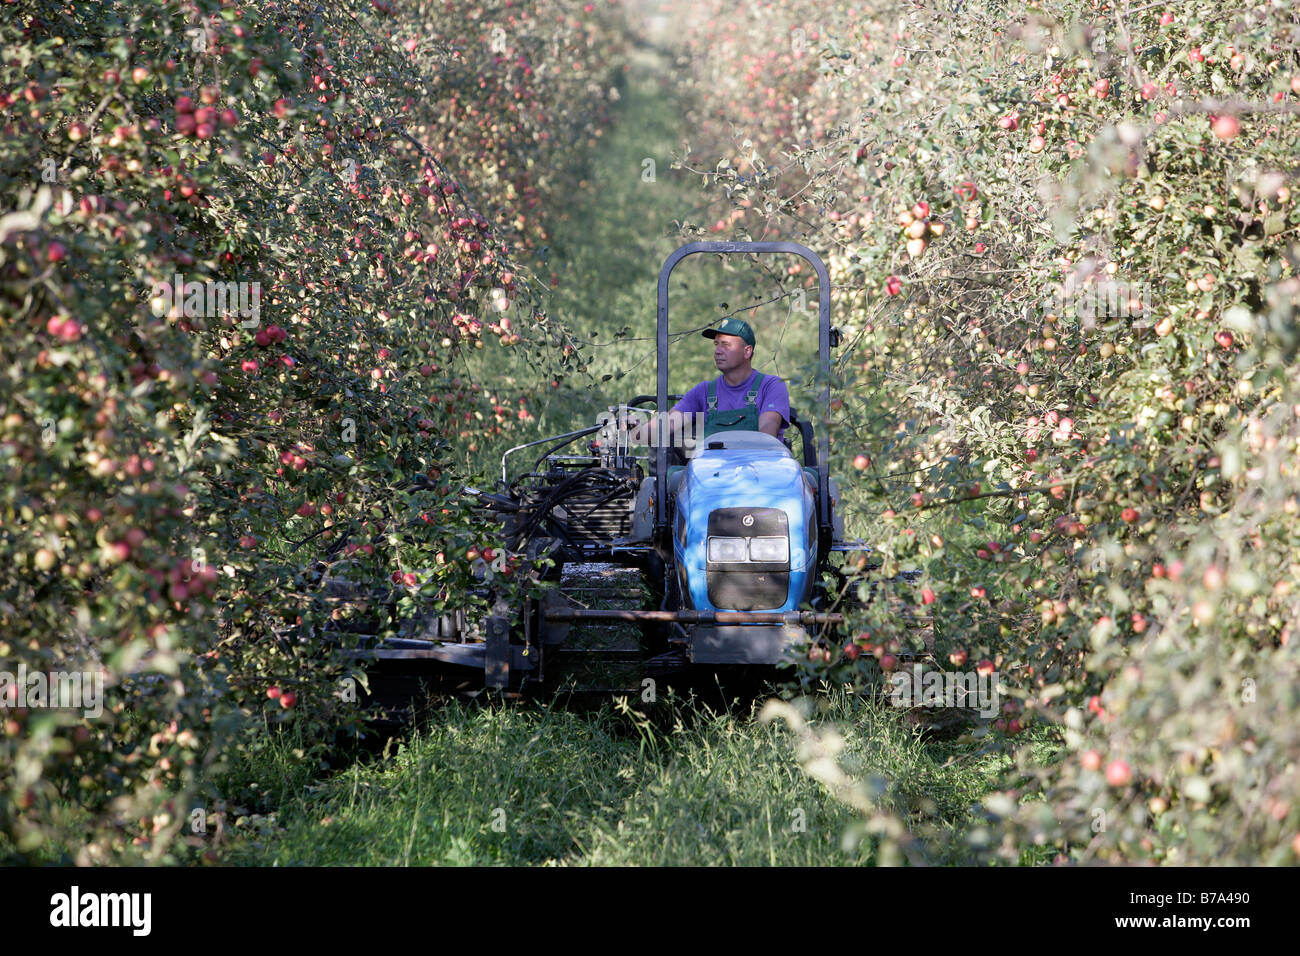 A Polish harvest helper driving an apple harvesting machine, a screen shaker, during the apple harvest on the apple plantations Stock Photo